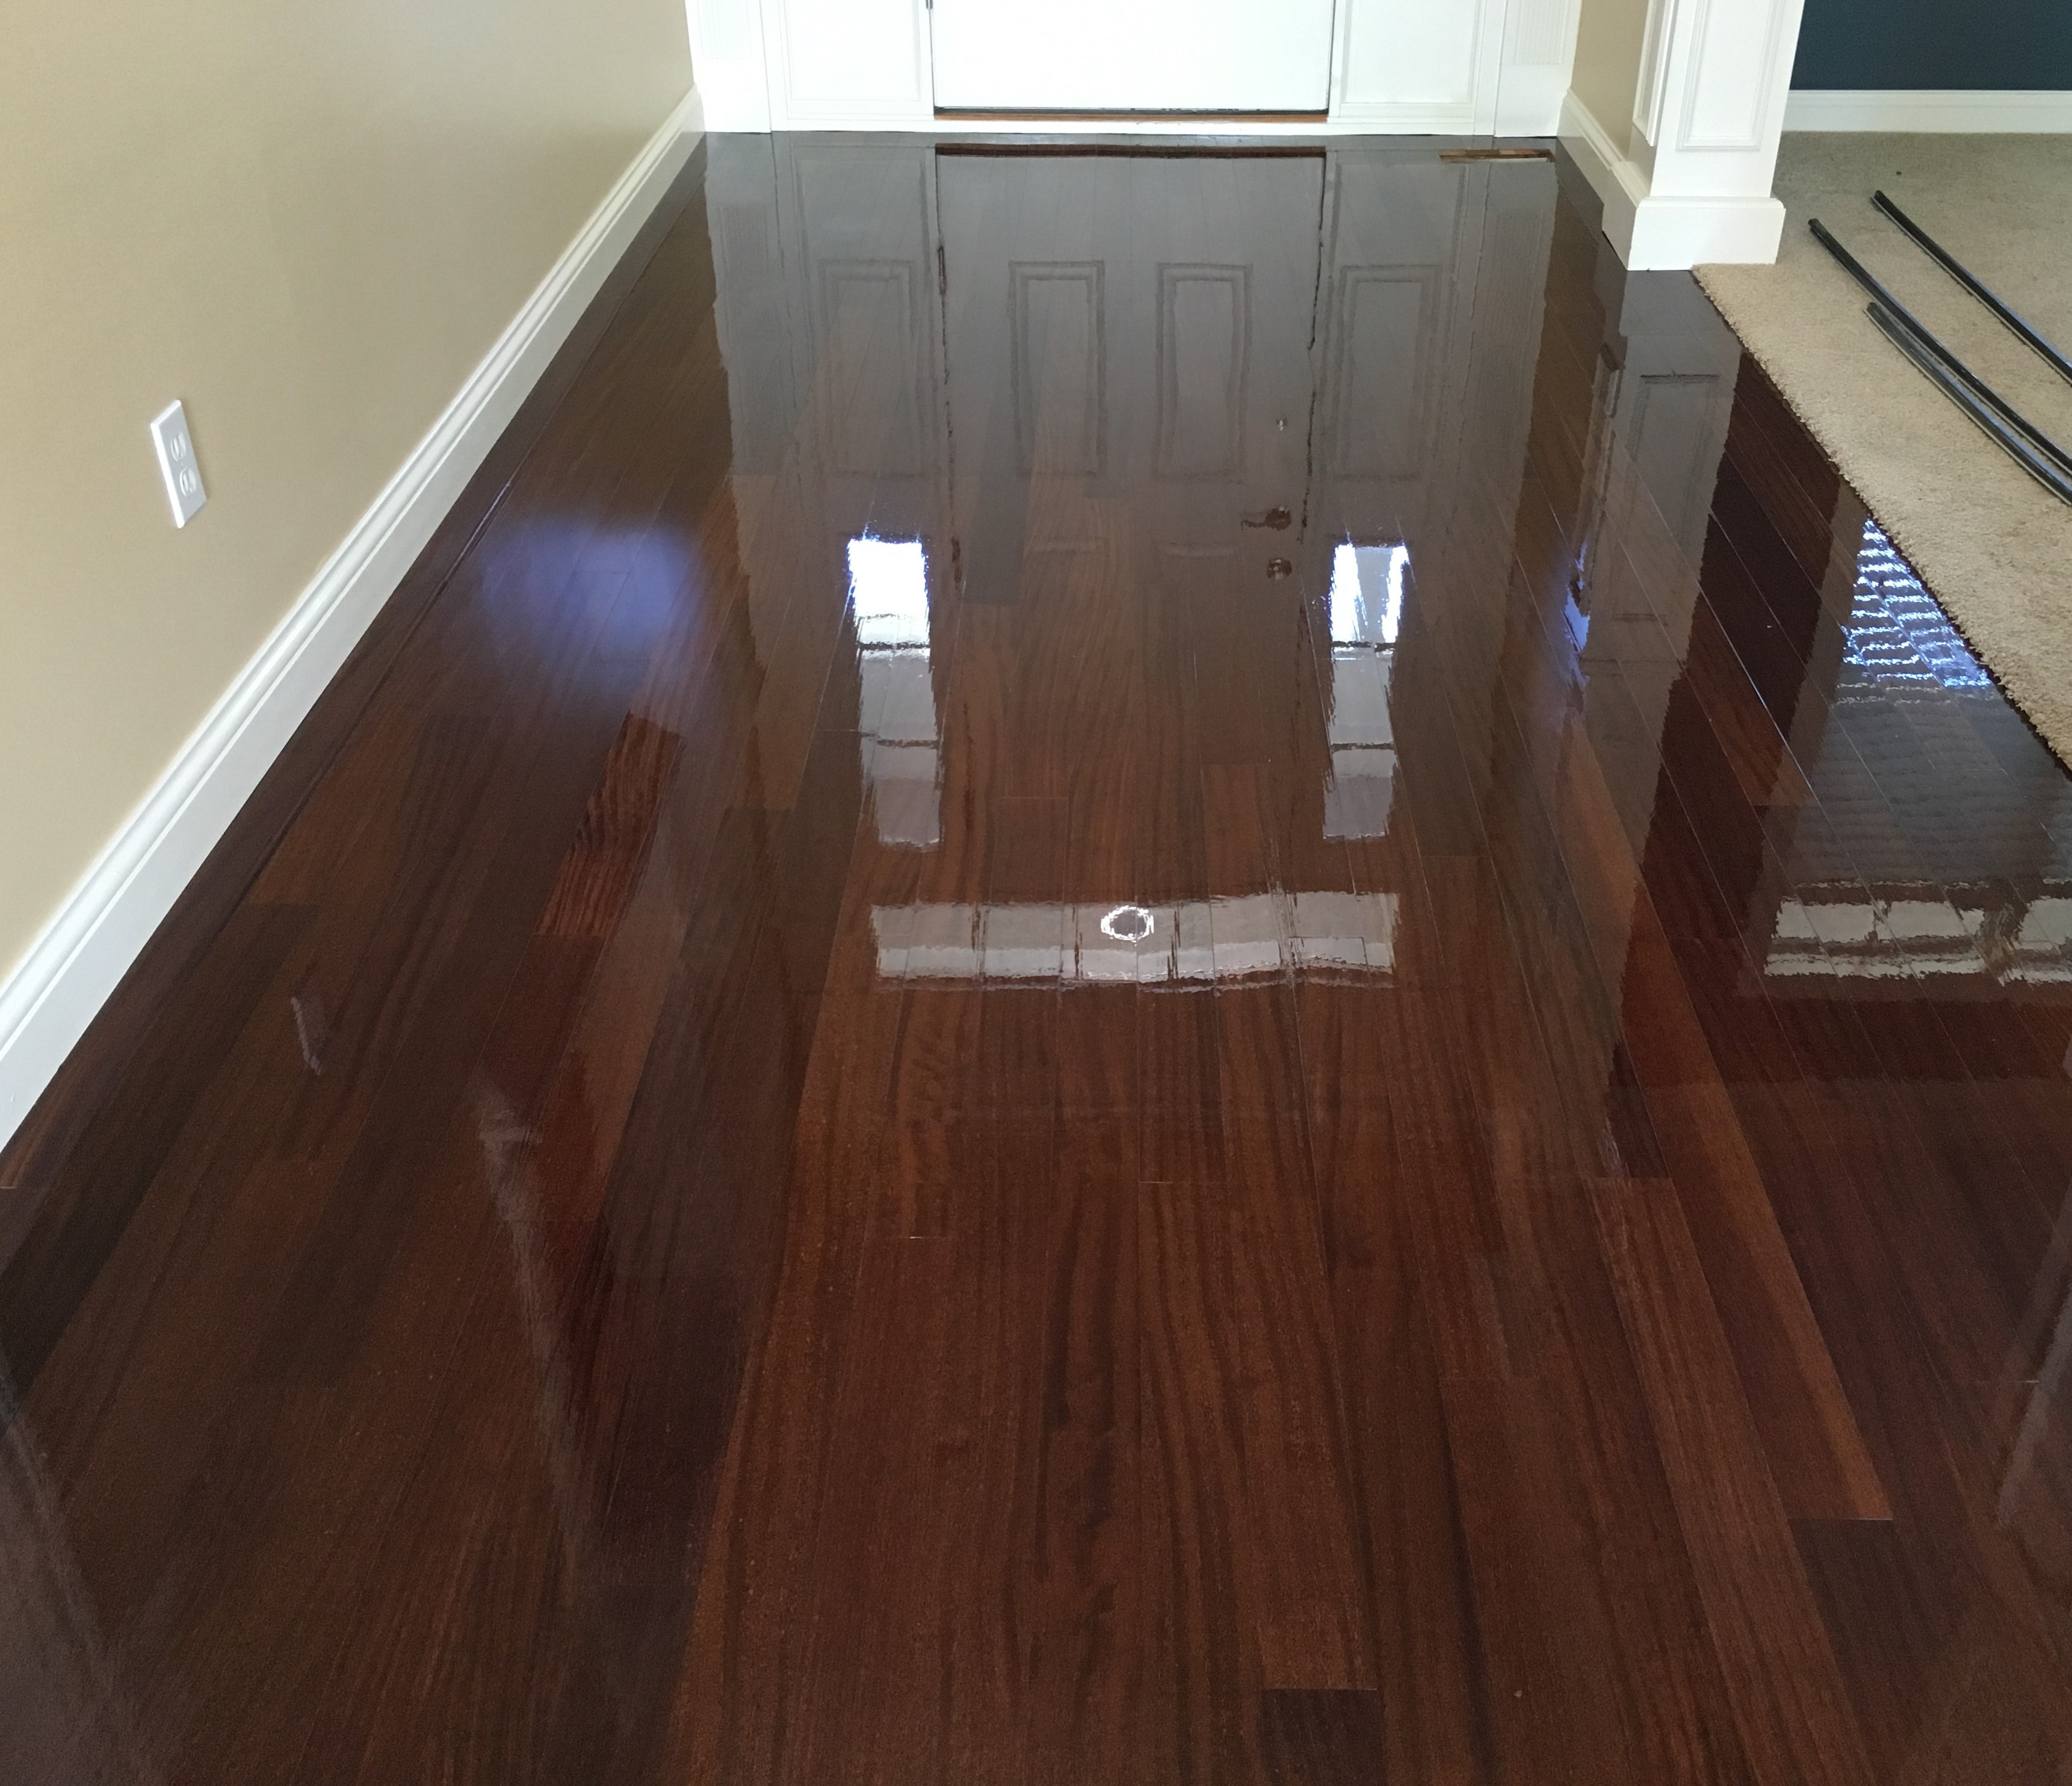 Referral Can Make Your Wood Floor Clean & Shiney